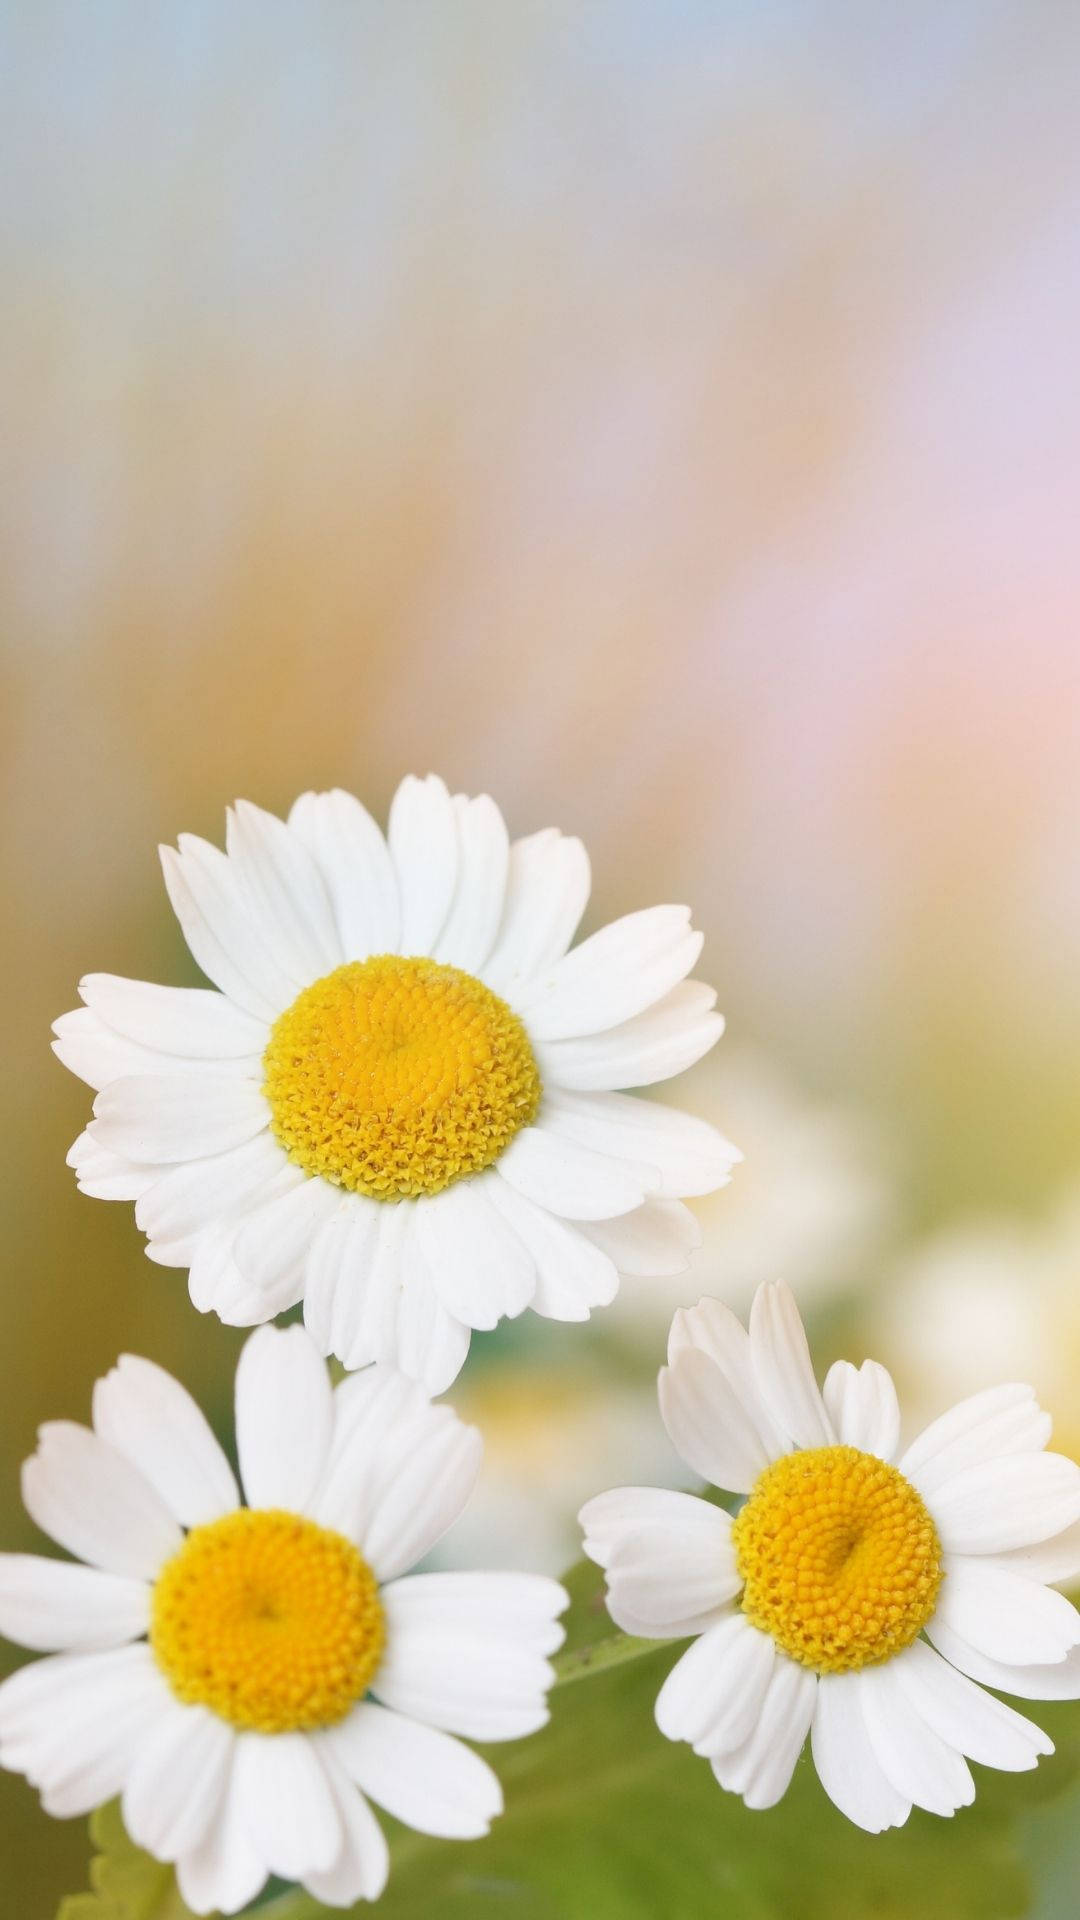 Daisy Iphone Background Wallpaper